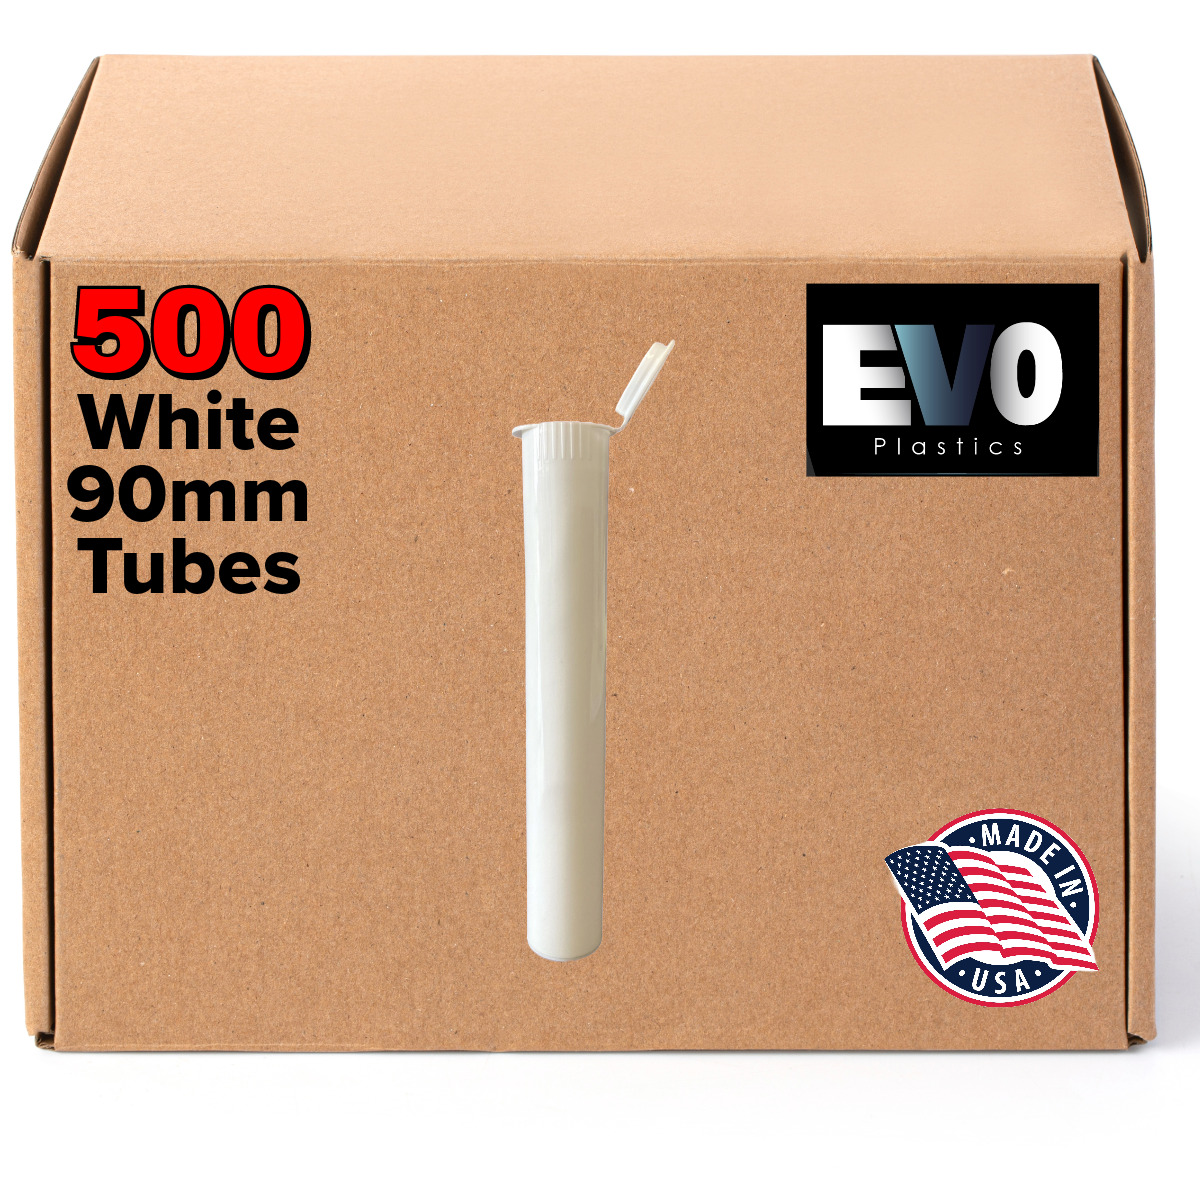 90mm Pre-Roll Tubes 500 White, Pop Top Joints, BPA-Free Pre-Roll Vials - US